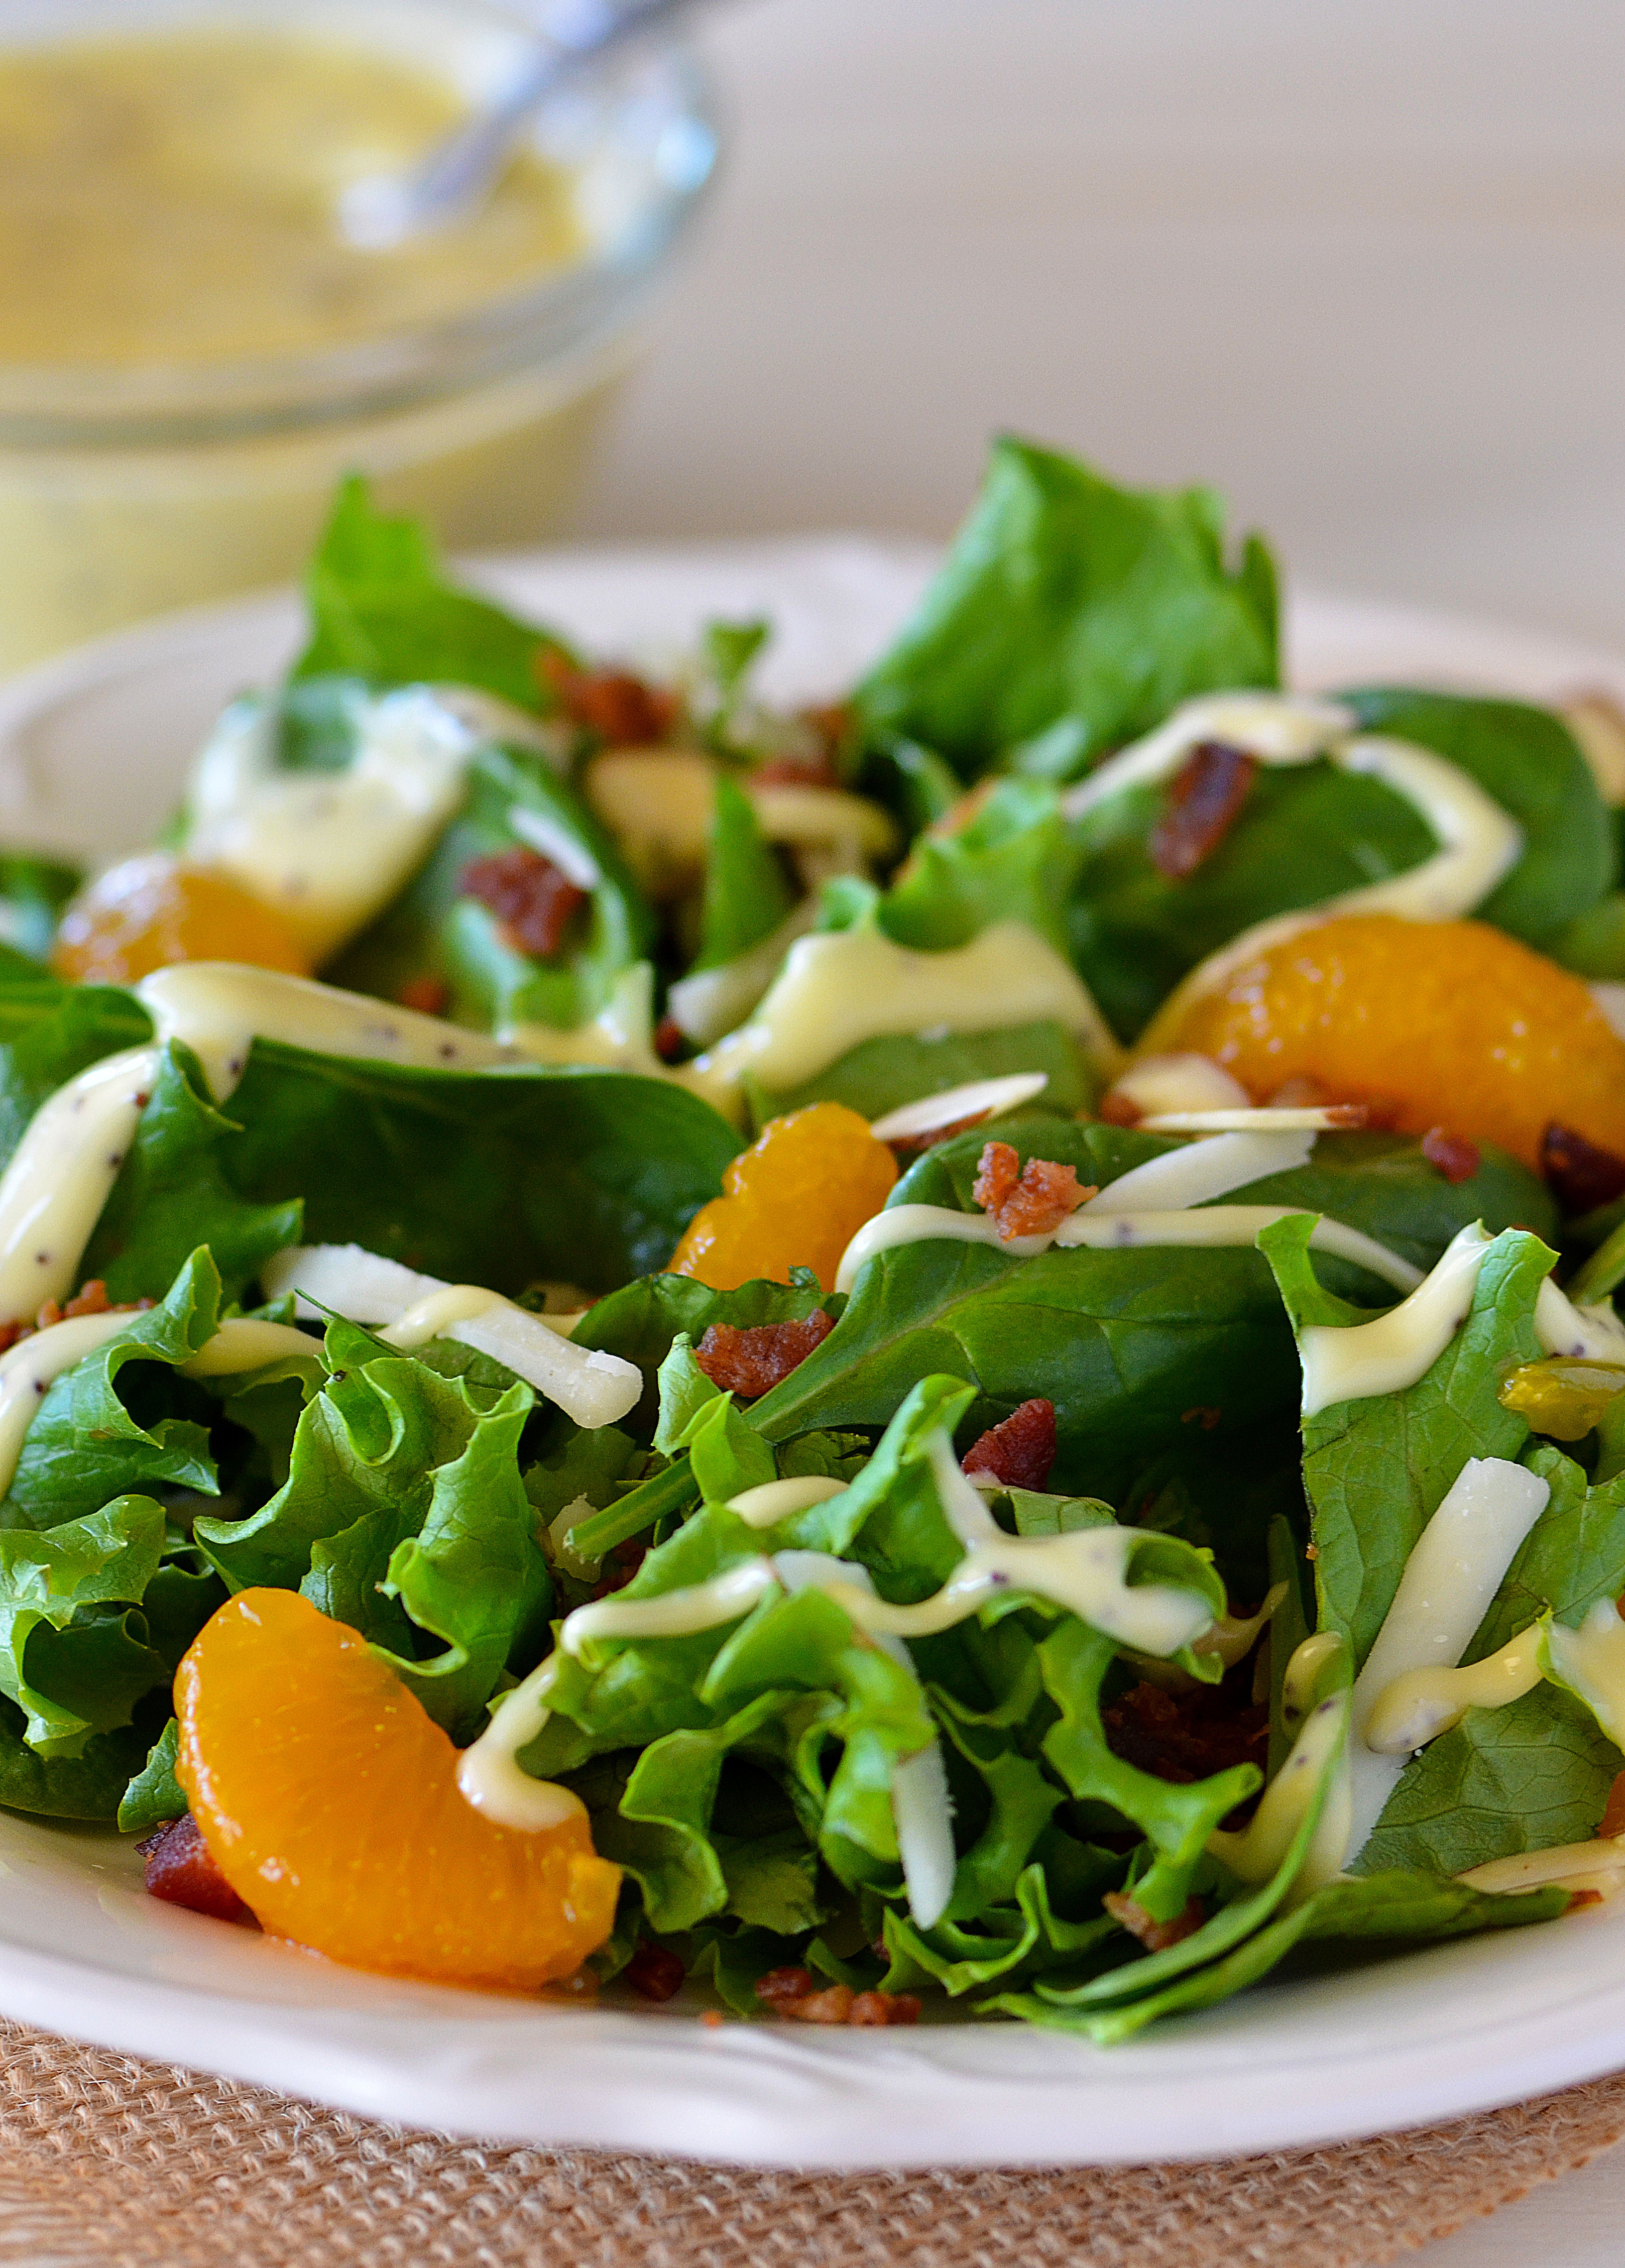 Spinach Salad with Bacon, Almonds and Oranges - Life In The Lofthouse